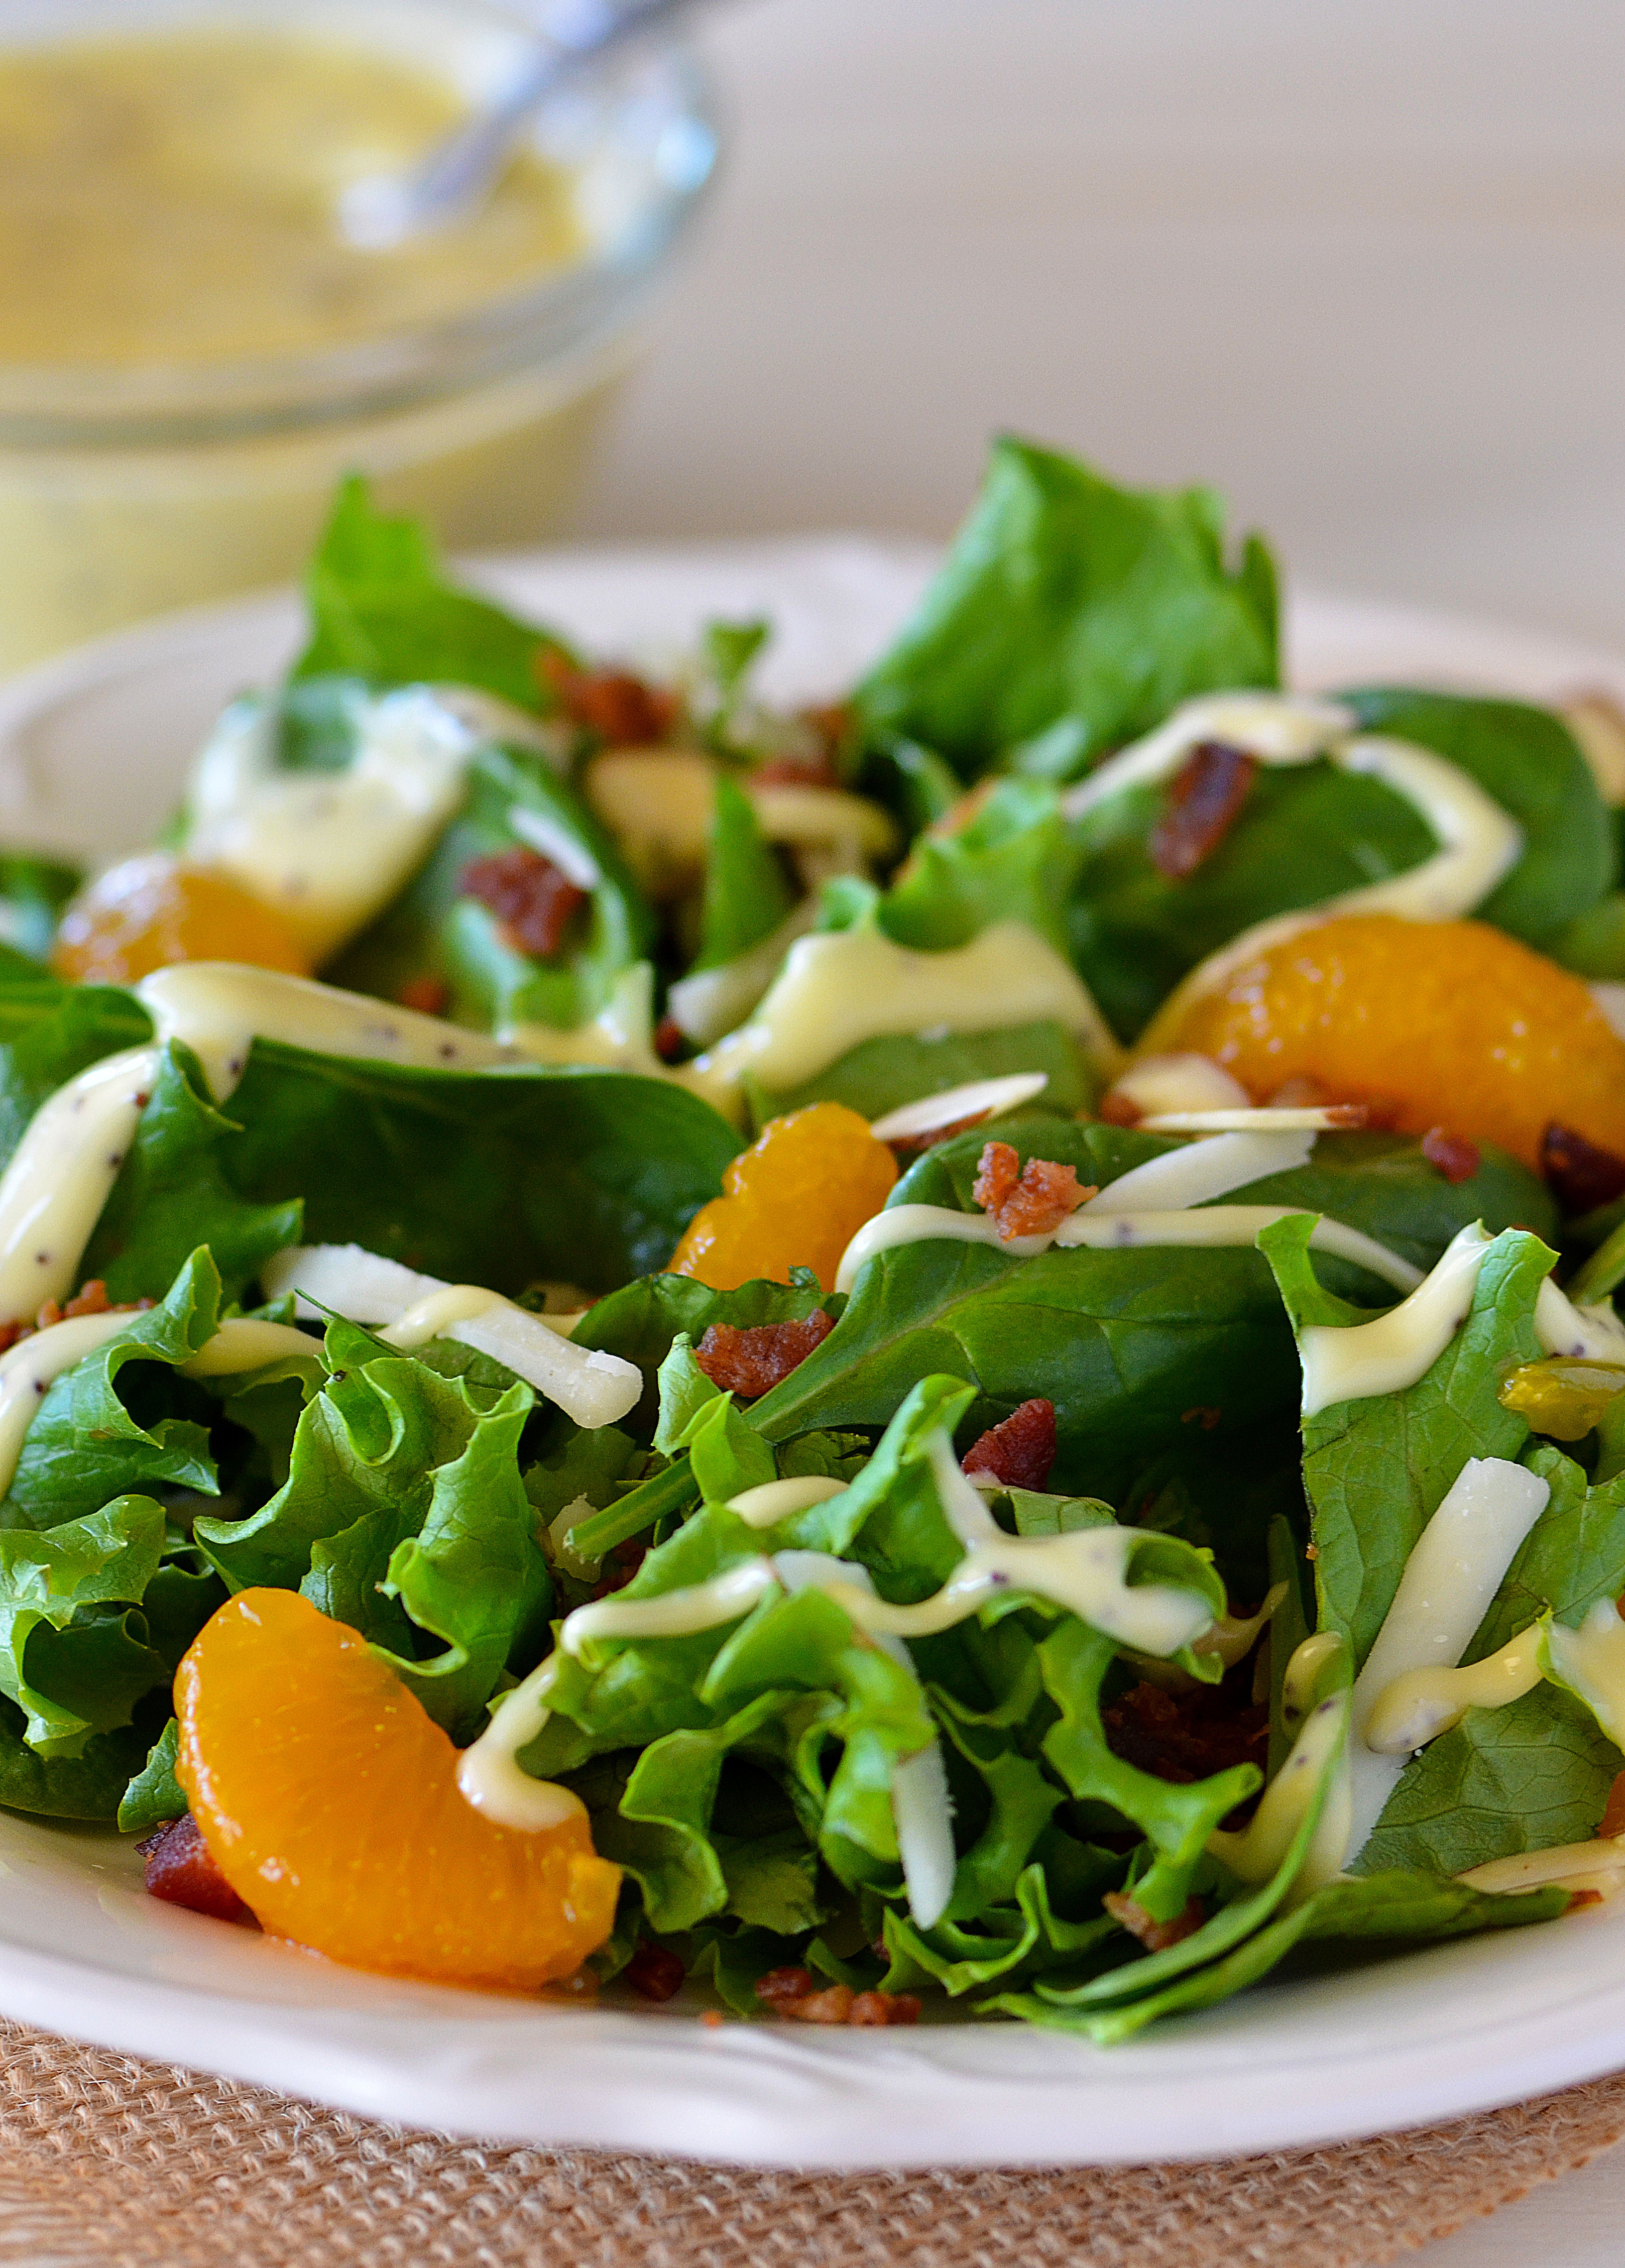 Spinach Salad with Bacon, Almonds and Oranges - Life In The Lofthouse